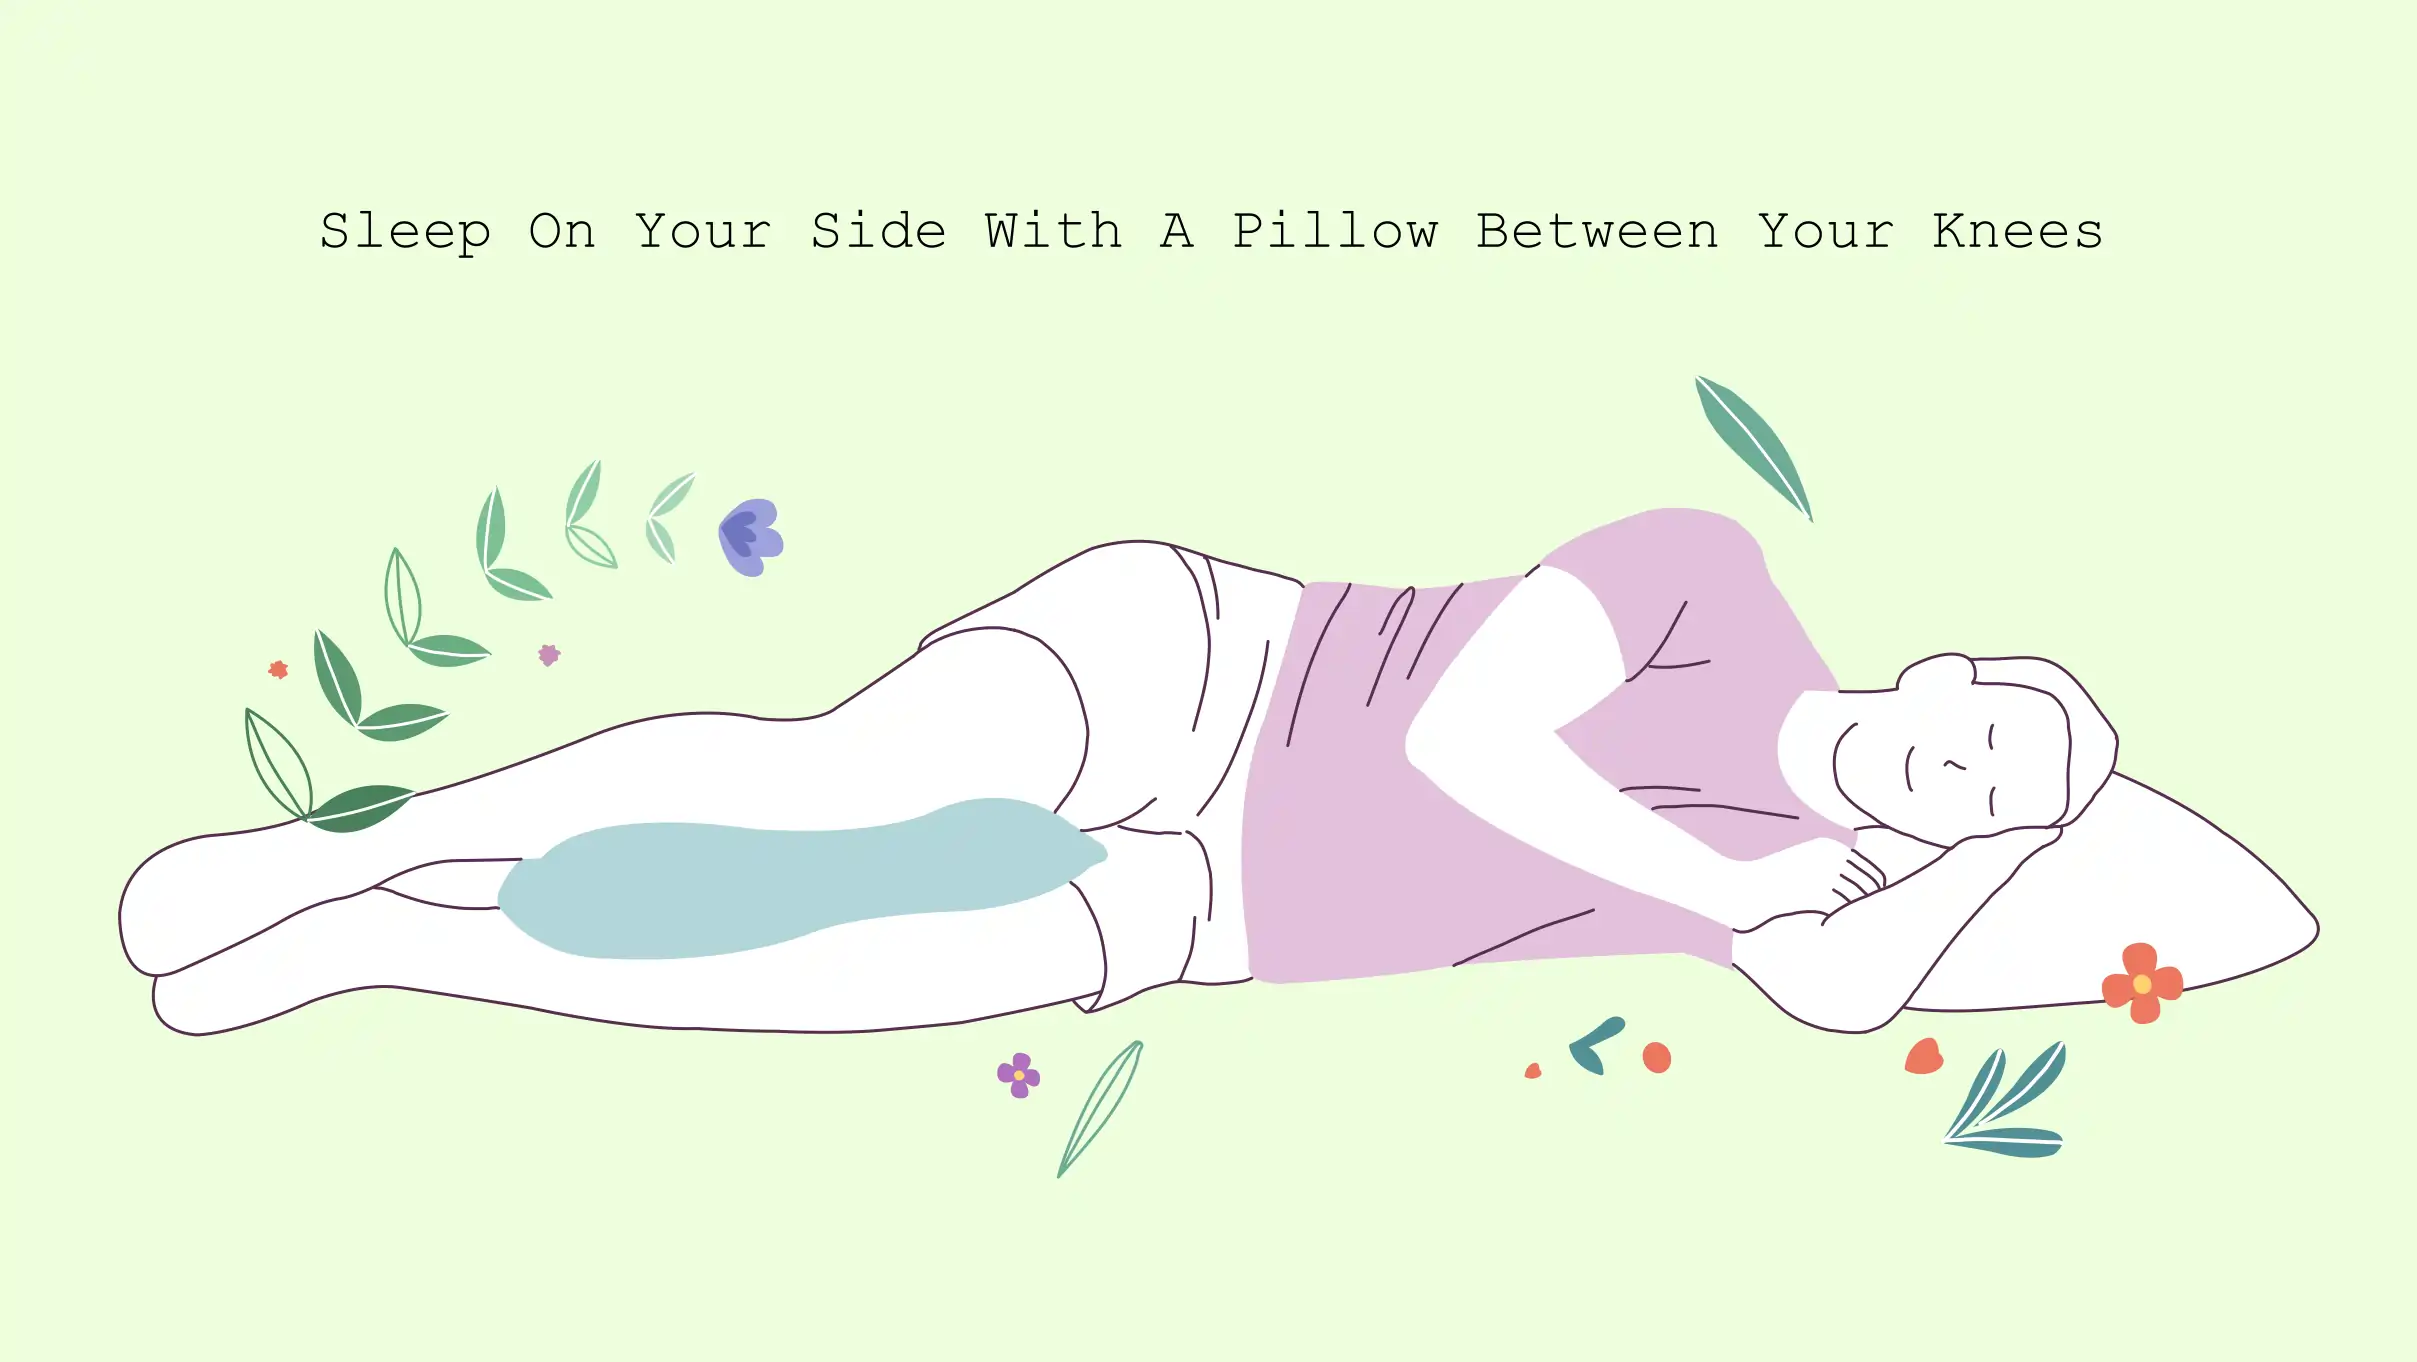 https://sleepguides.in/storage/2023/04/xxx-Sleep-on-your-side-with-a-pillow-between-your-knees.webp